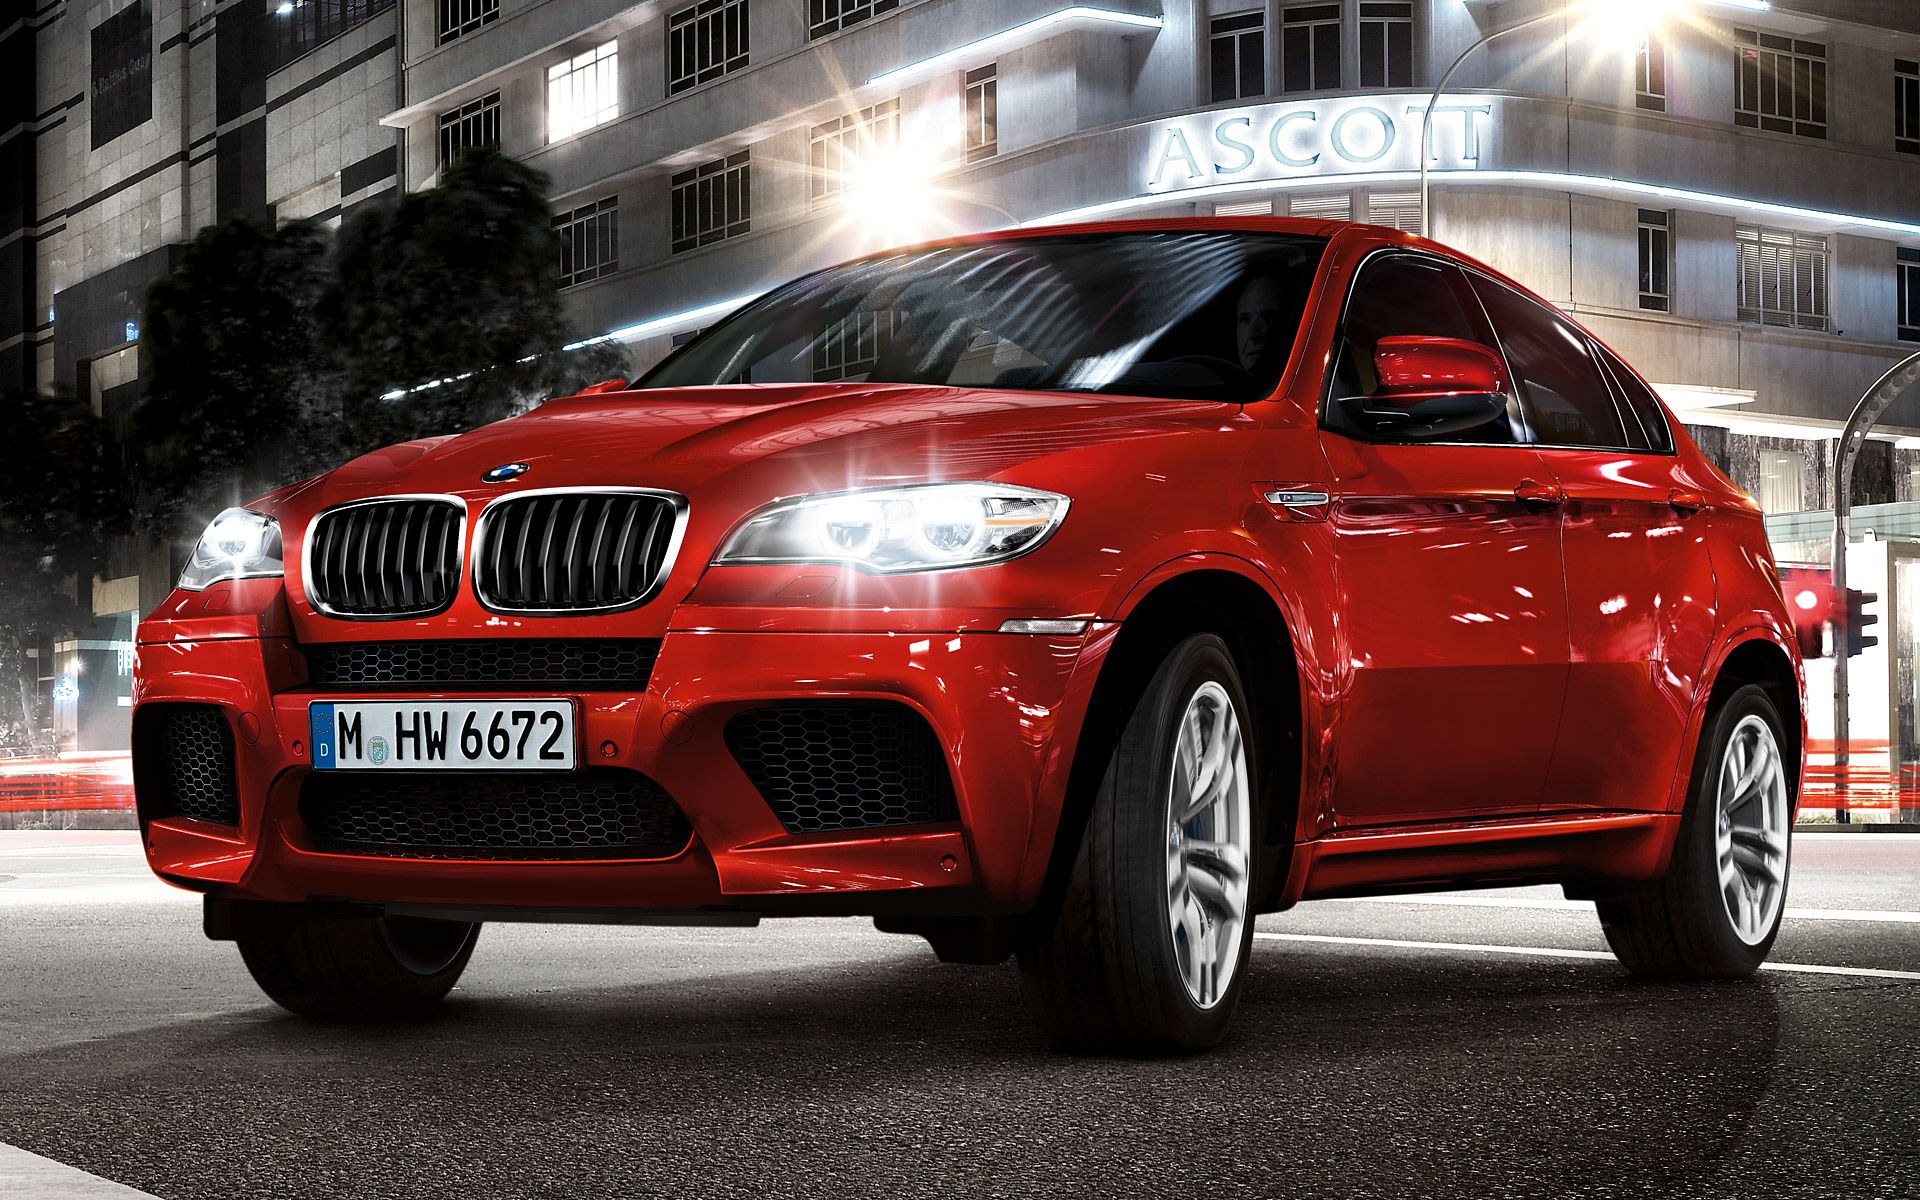 Wallpaper: 2013 BMW X6 and 2013 BMW X6 M Facelifts